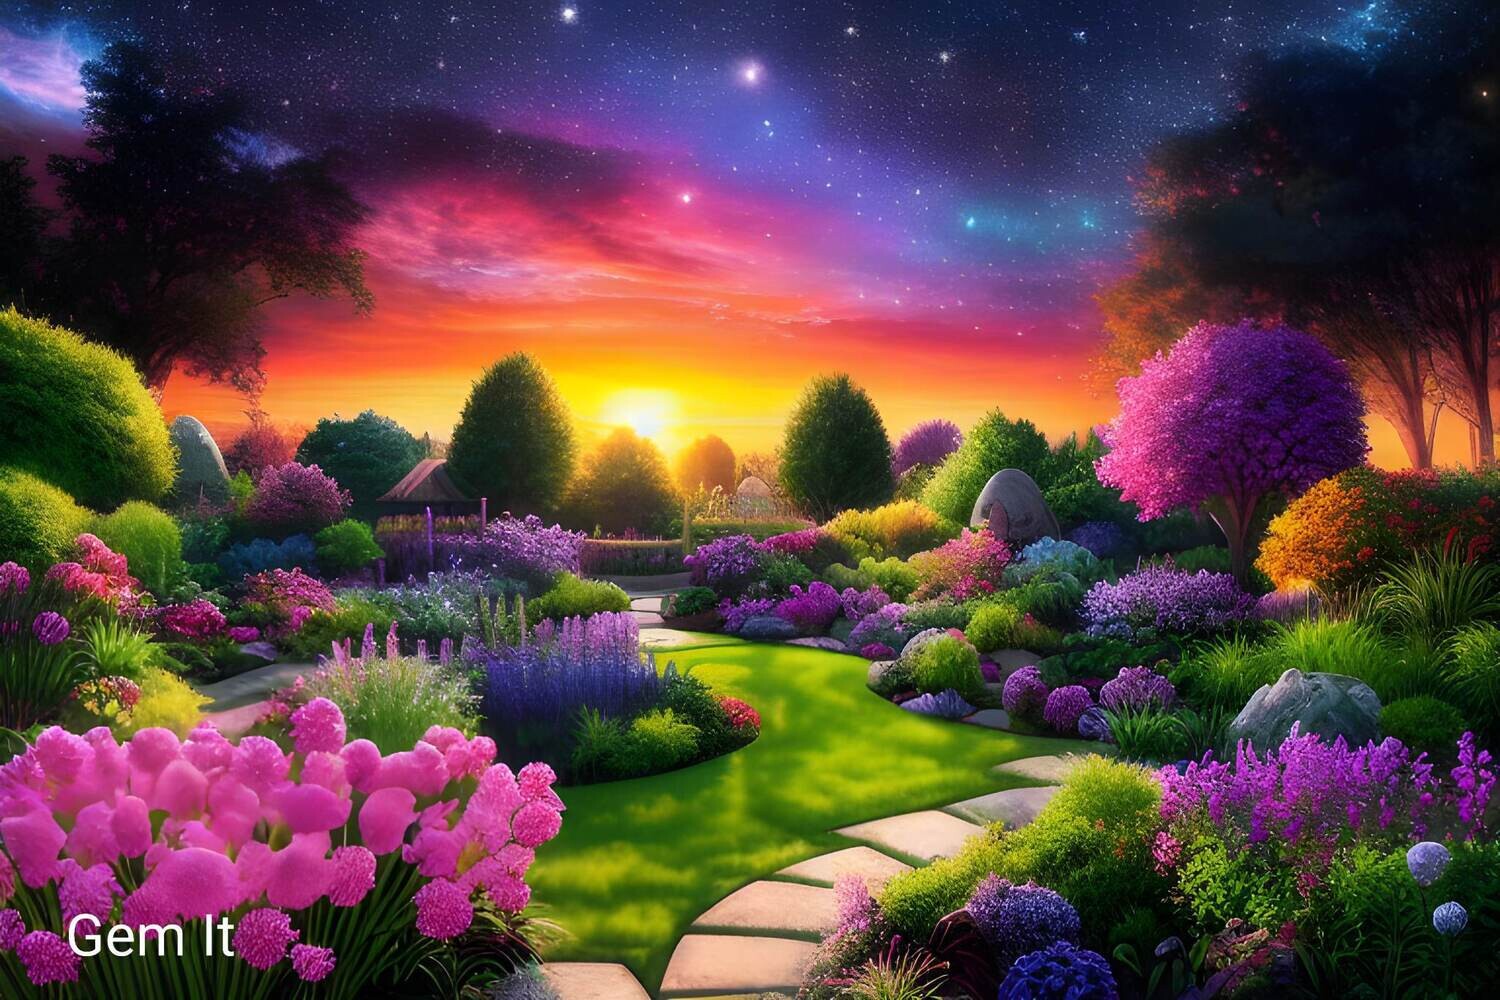 Flower Garden Night Sky - Specially ordered for you. Delivery is approximately 4 - 6 weeks.